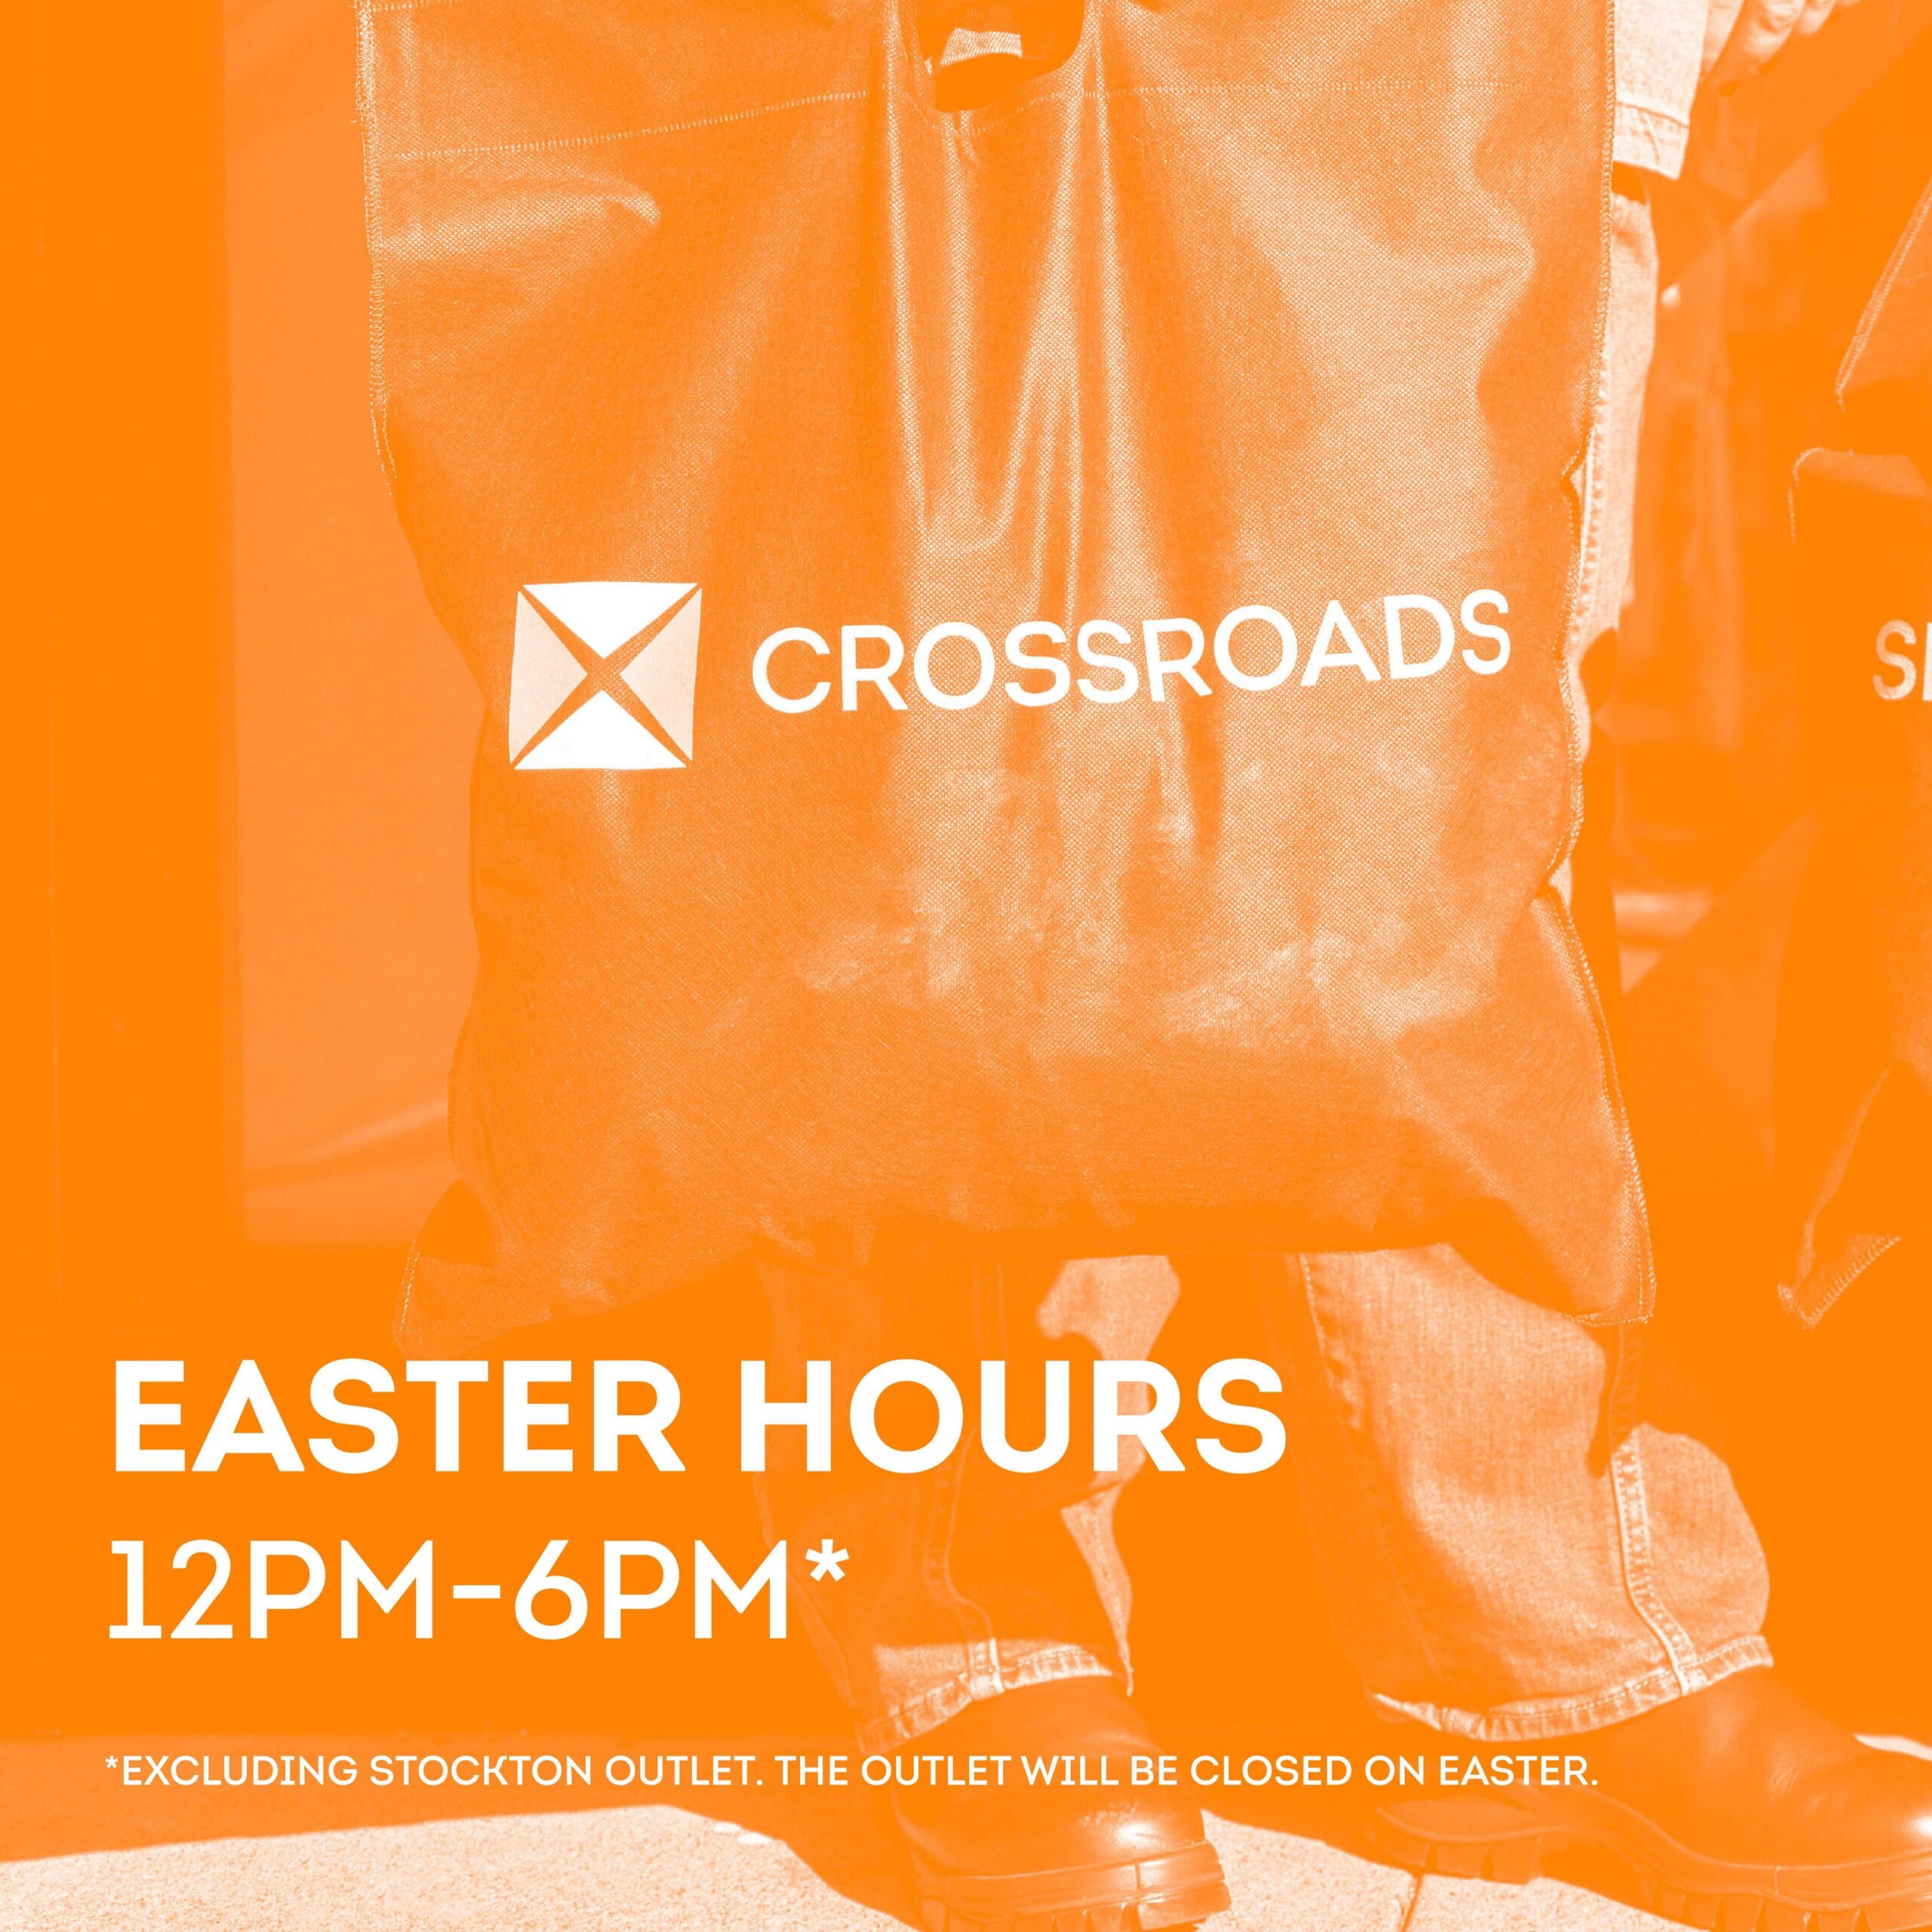 EASTER HOURS - Sunday 3/31

Stores will be open from 12pm-6pm.* 

*Excluding our outlet in Stockton, CA. The Outlet will be closed on Easter. 

#crossroadstrading #crossroadsfinds #crossroadsstore #fashionfinds #buyselltrade #style #thriftfinds #consignment #shopping #womensfashion #mensfashion #fashionblogger #ootd #fashion #thrift #sustainablefashion #secondhandfirst #shopthrift #consignment #thrifted